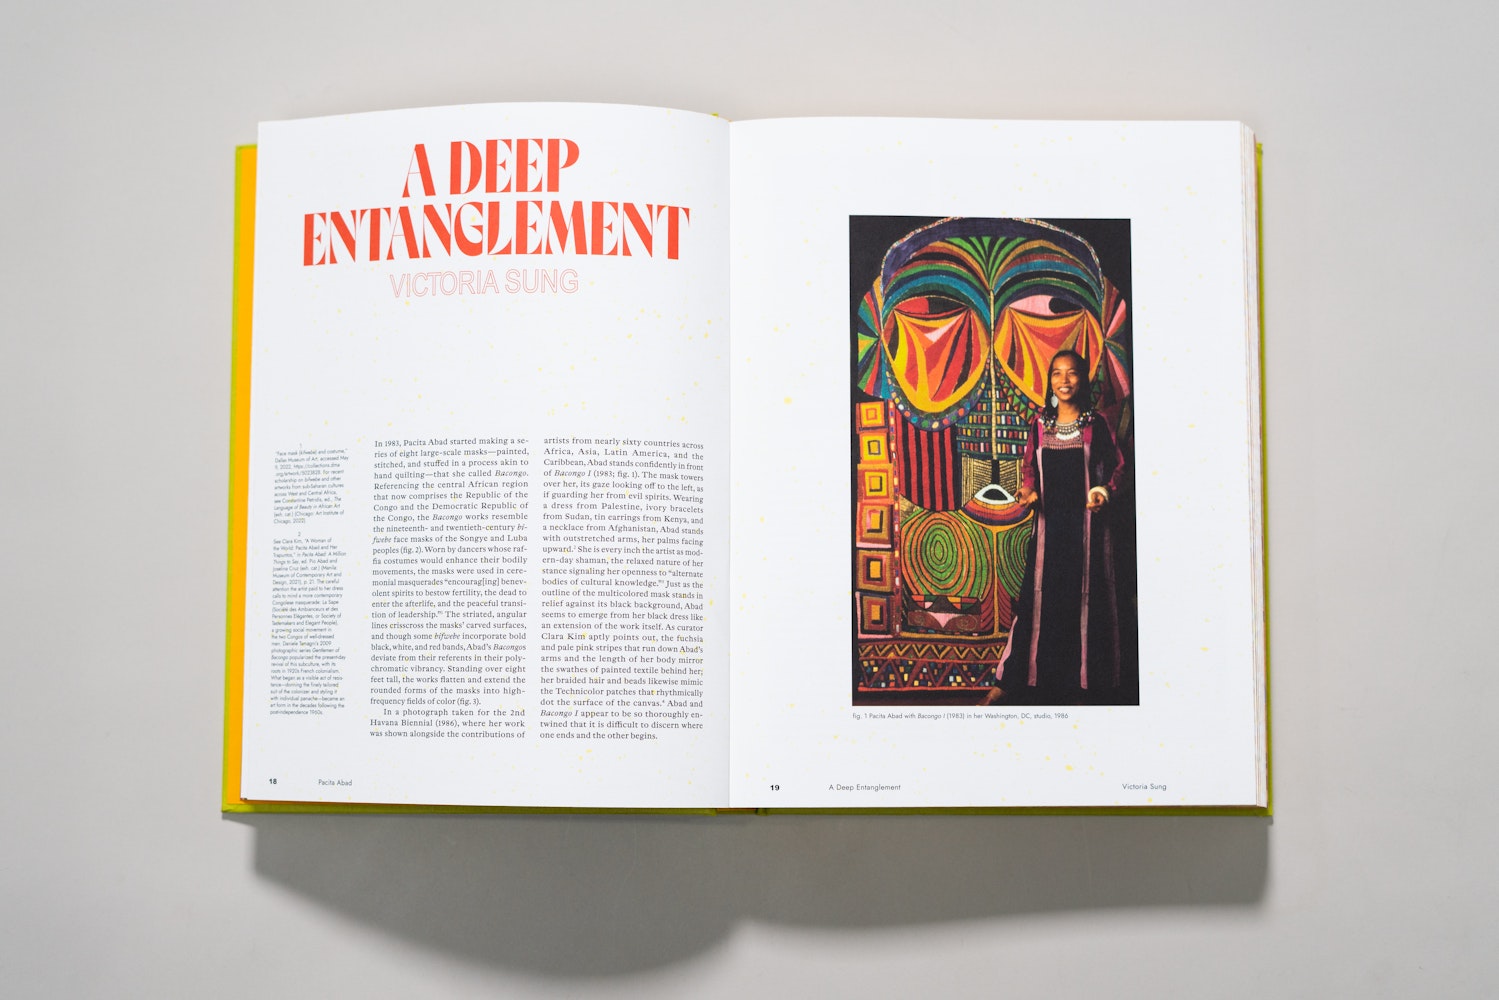 Spread of a large art book is open to a page of an essay with the title A Deep Etanglement.